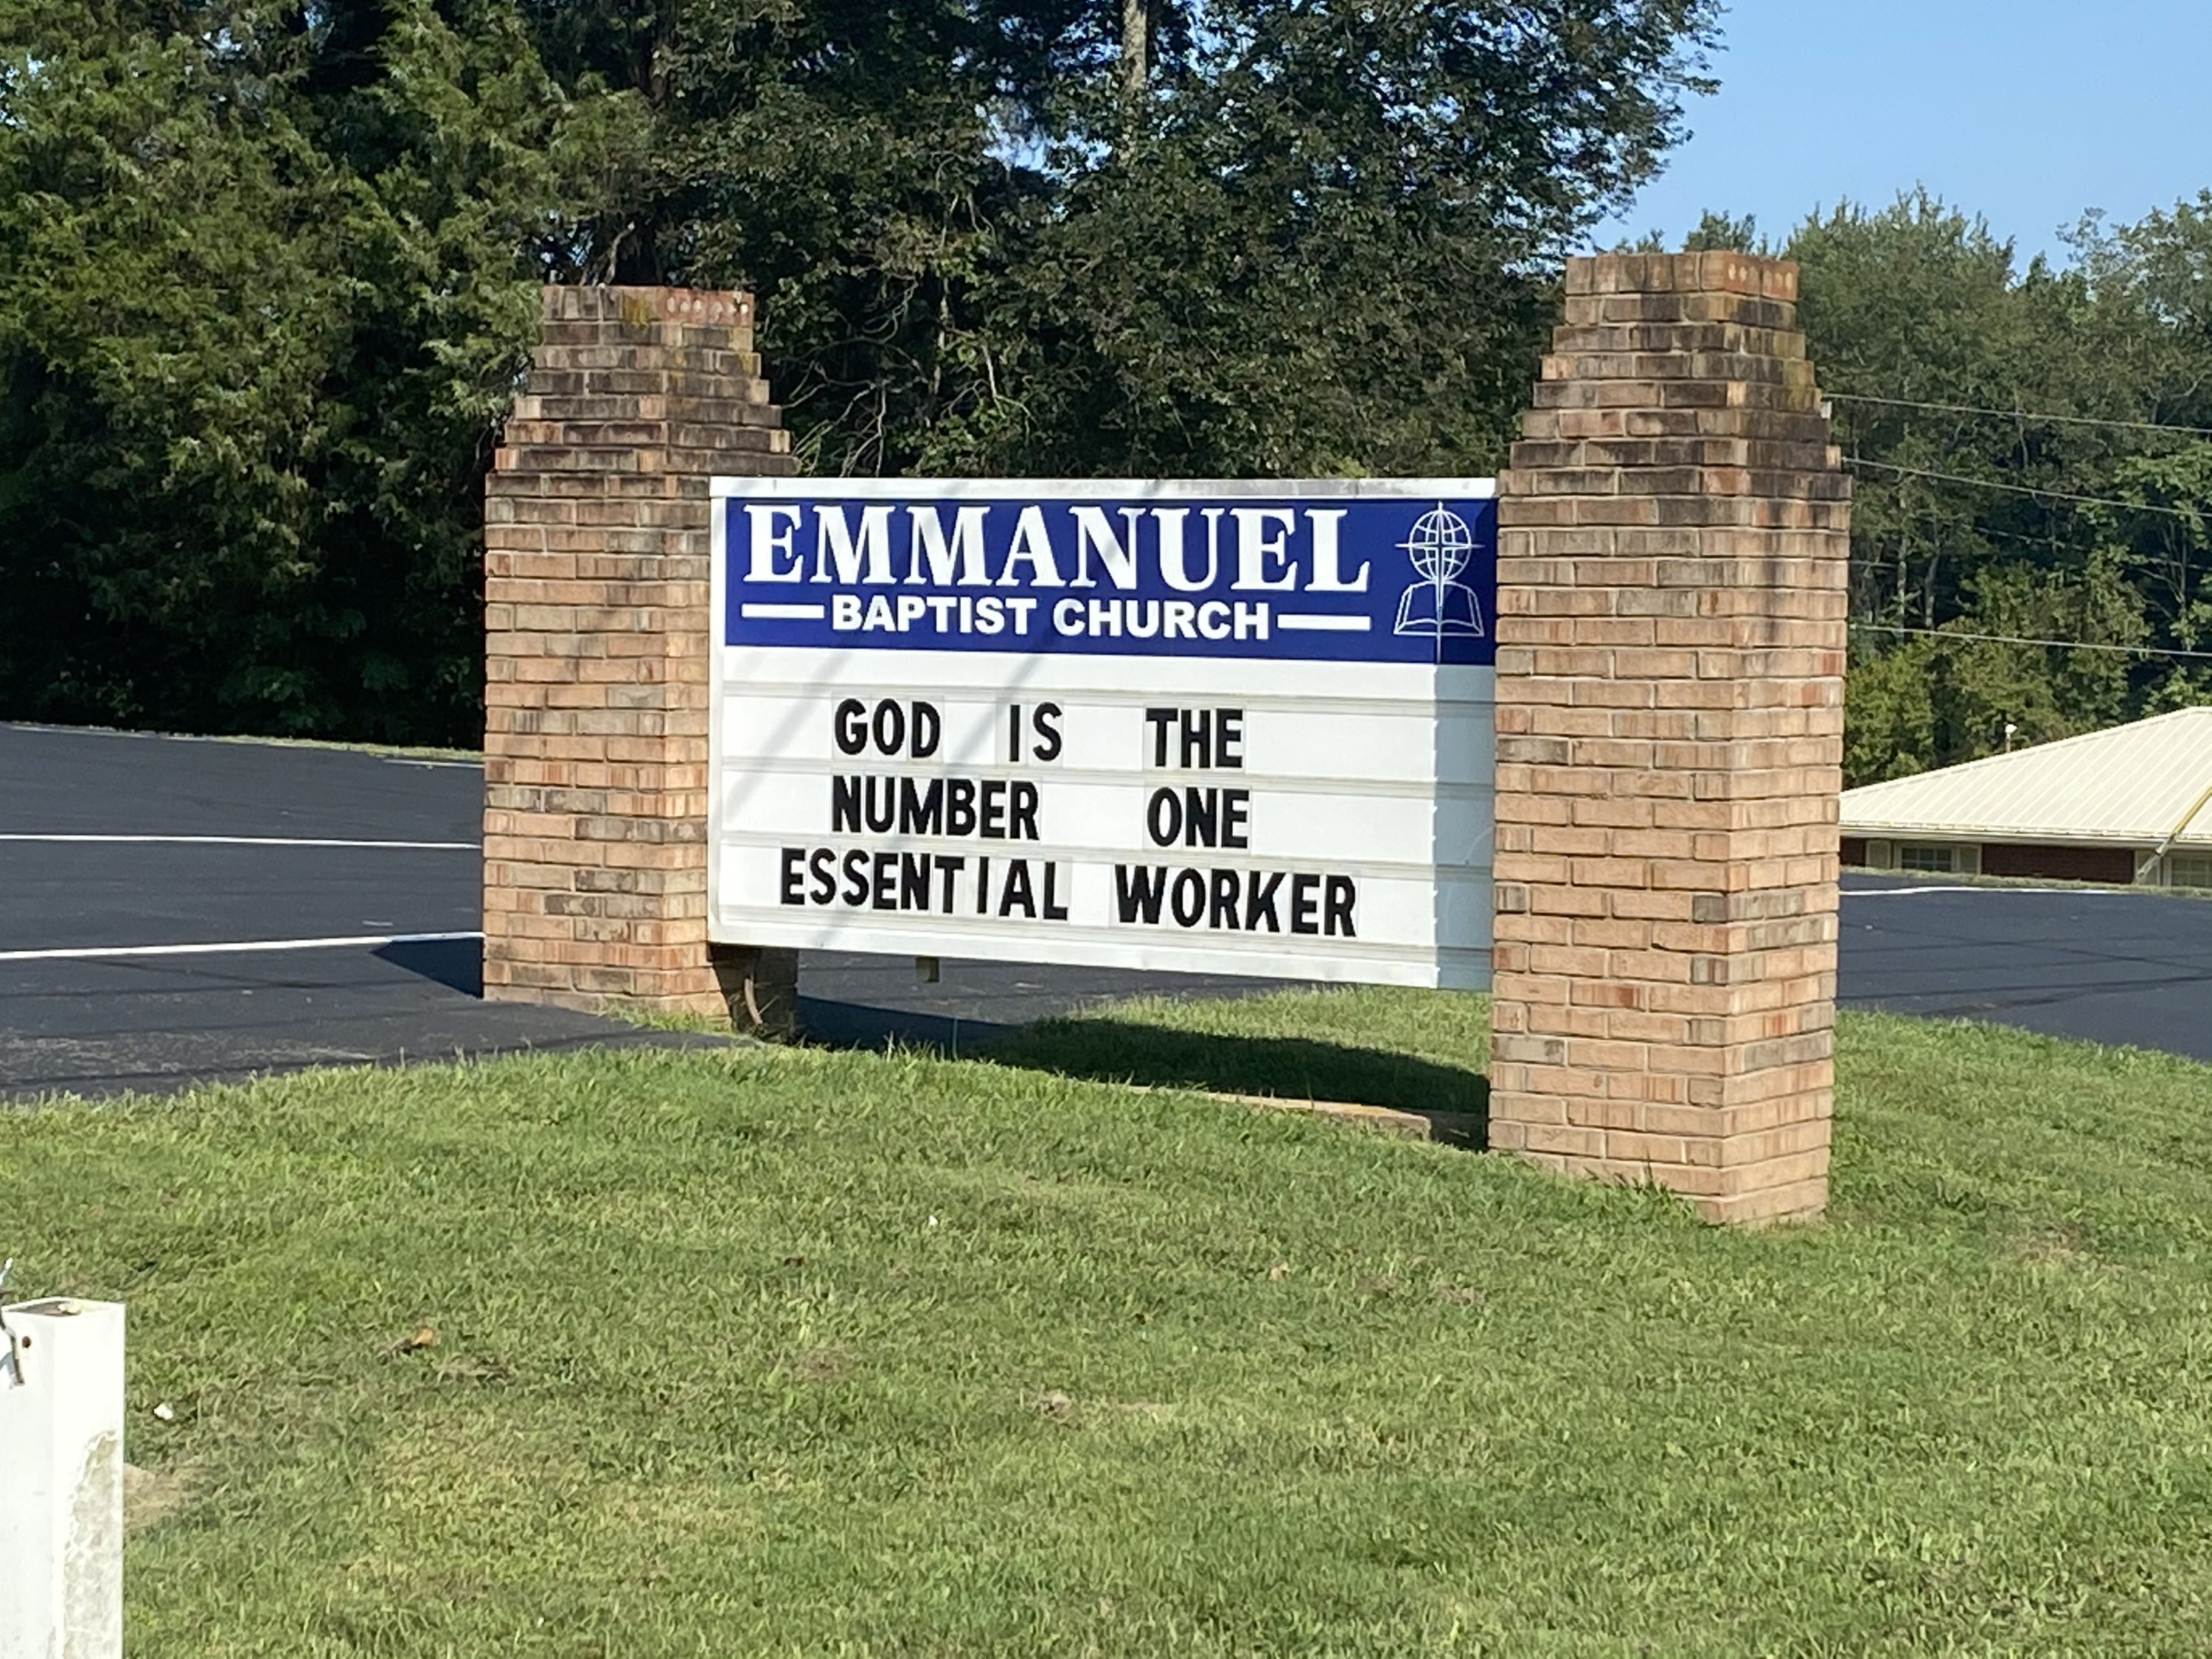 God is the Number One Essential Worker Church Sign - Emmanuel Baptist Church - Buffalo Trail - Morristown, TN